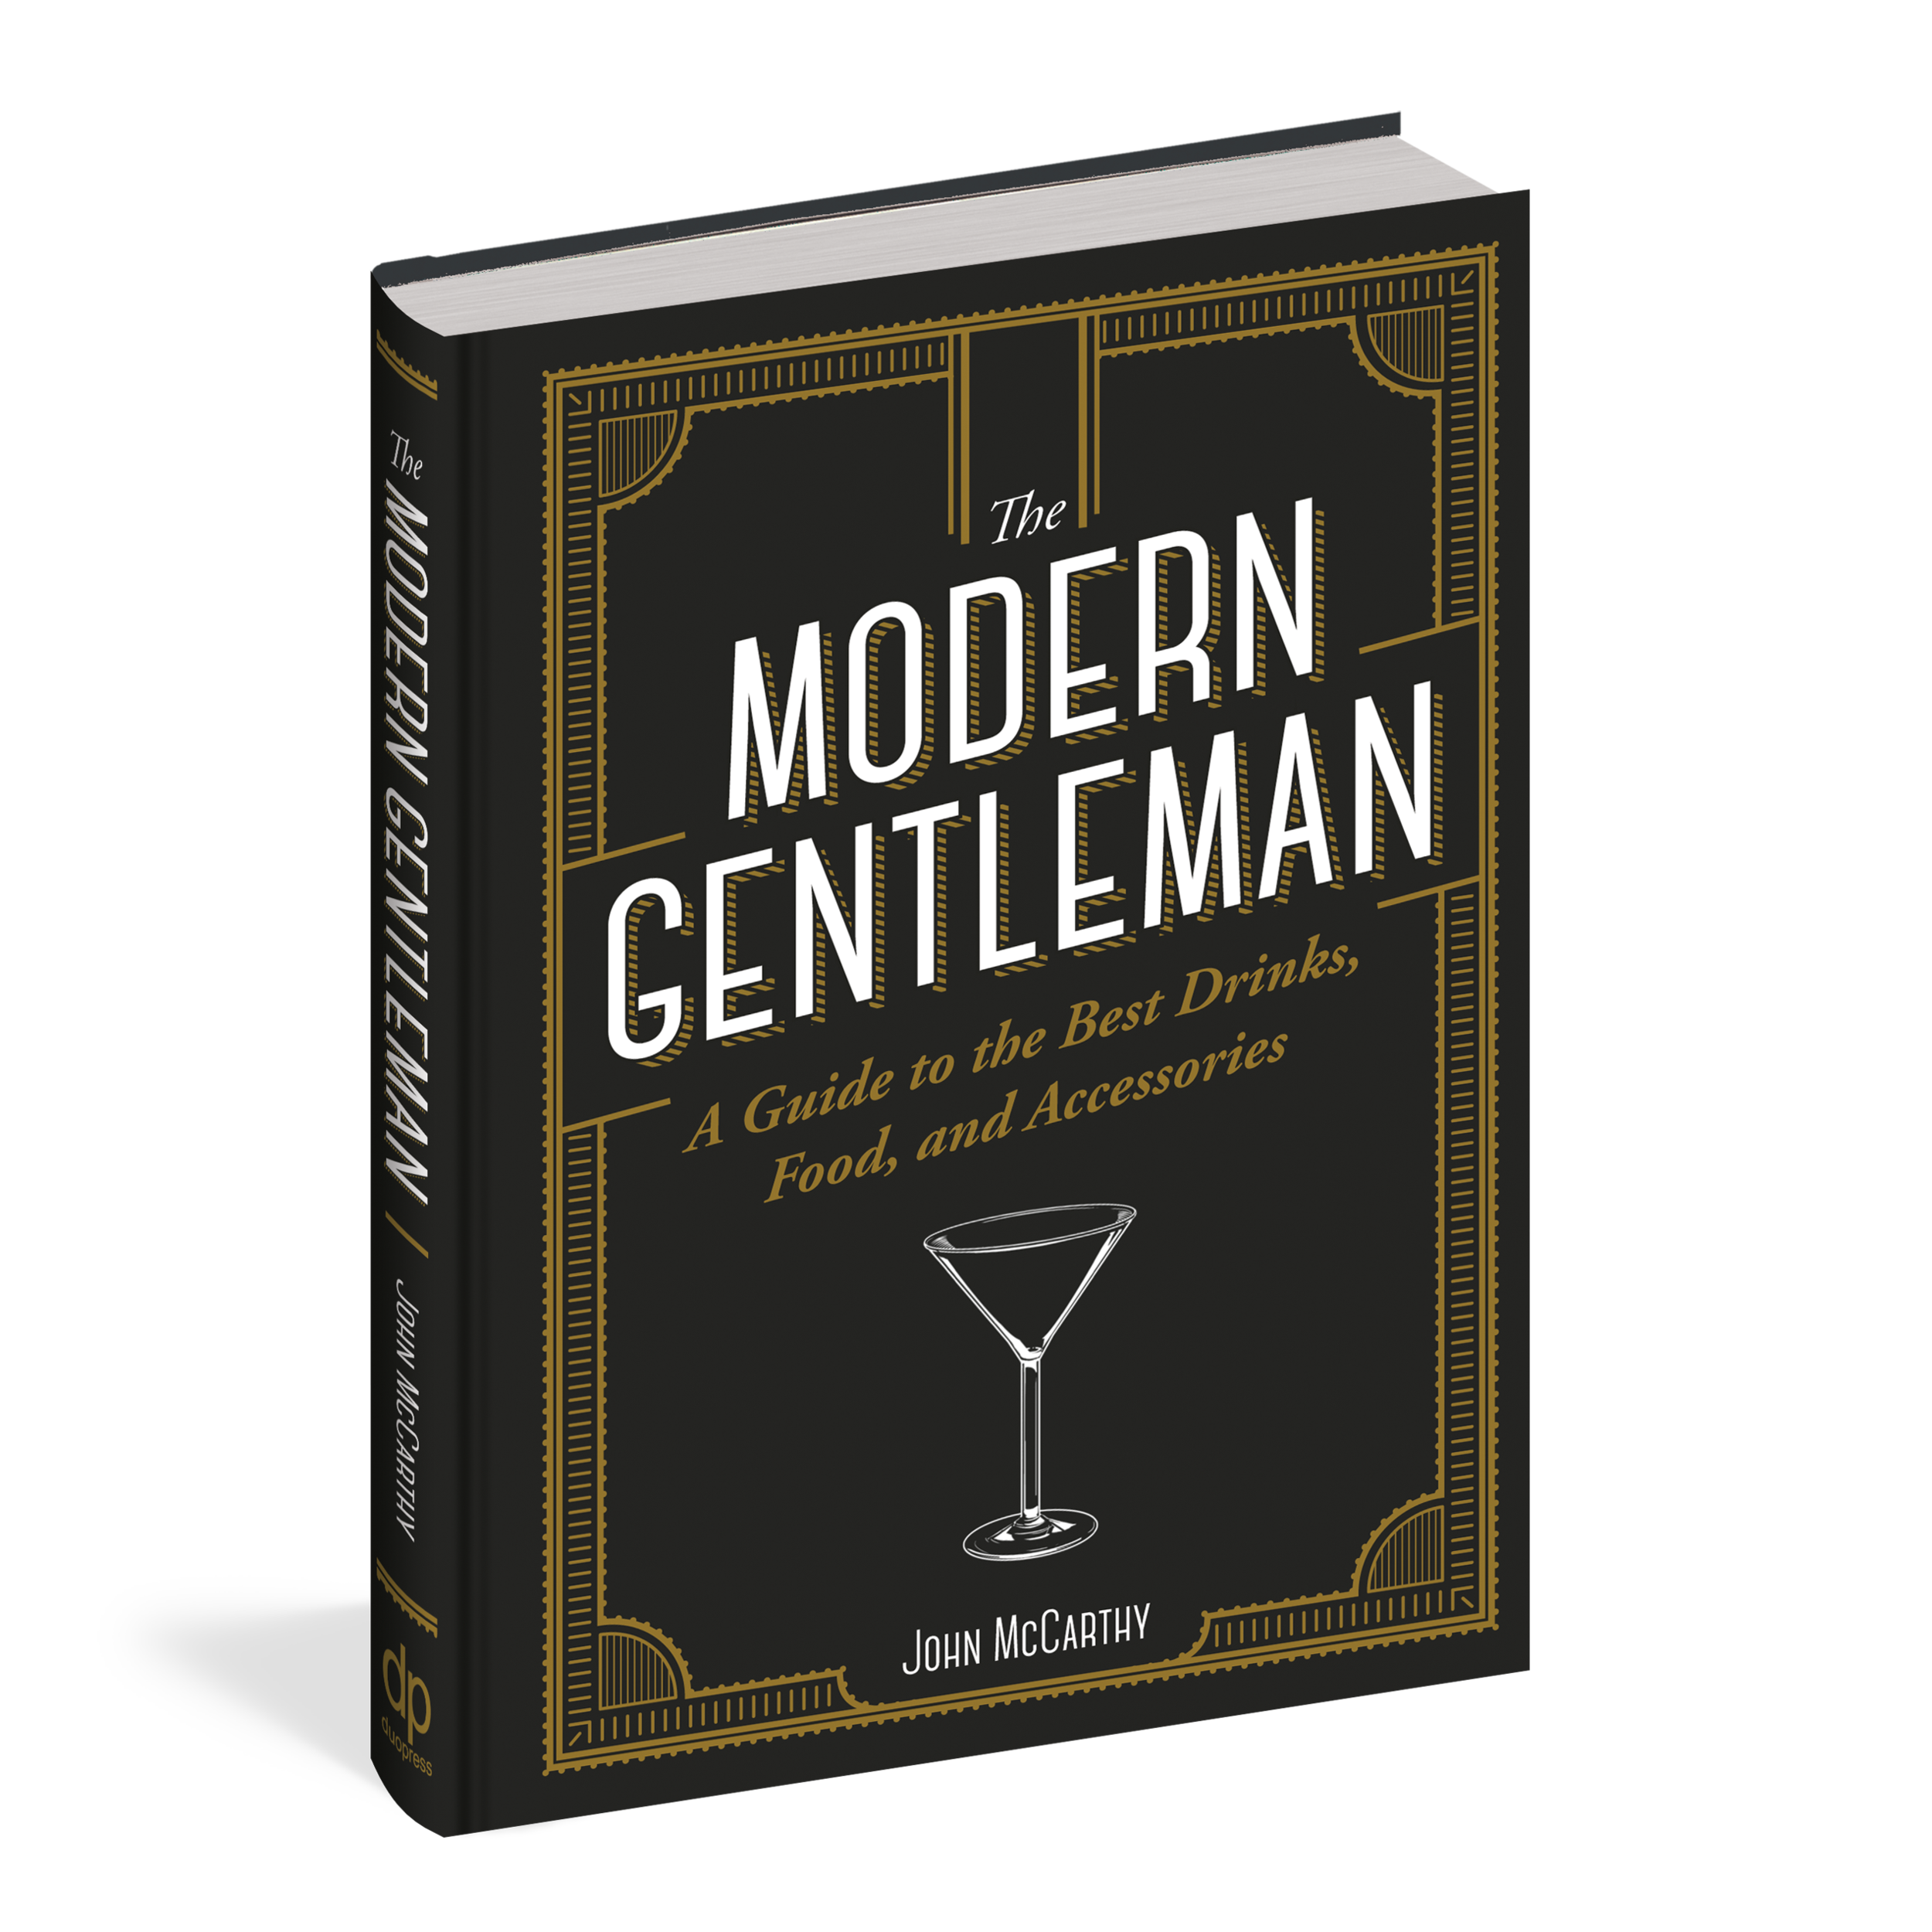 The Modern Gentleman: The Guide to the Best Food, Drinks, and Accessories (Copy) (Copy) (Copy) (Copy) (Copy) (Copy)